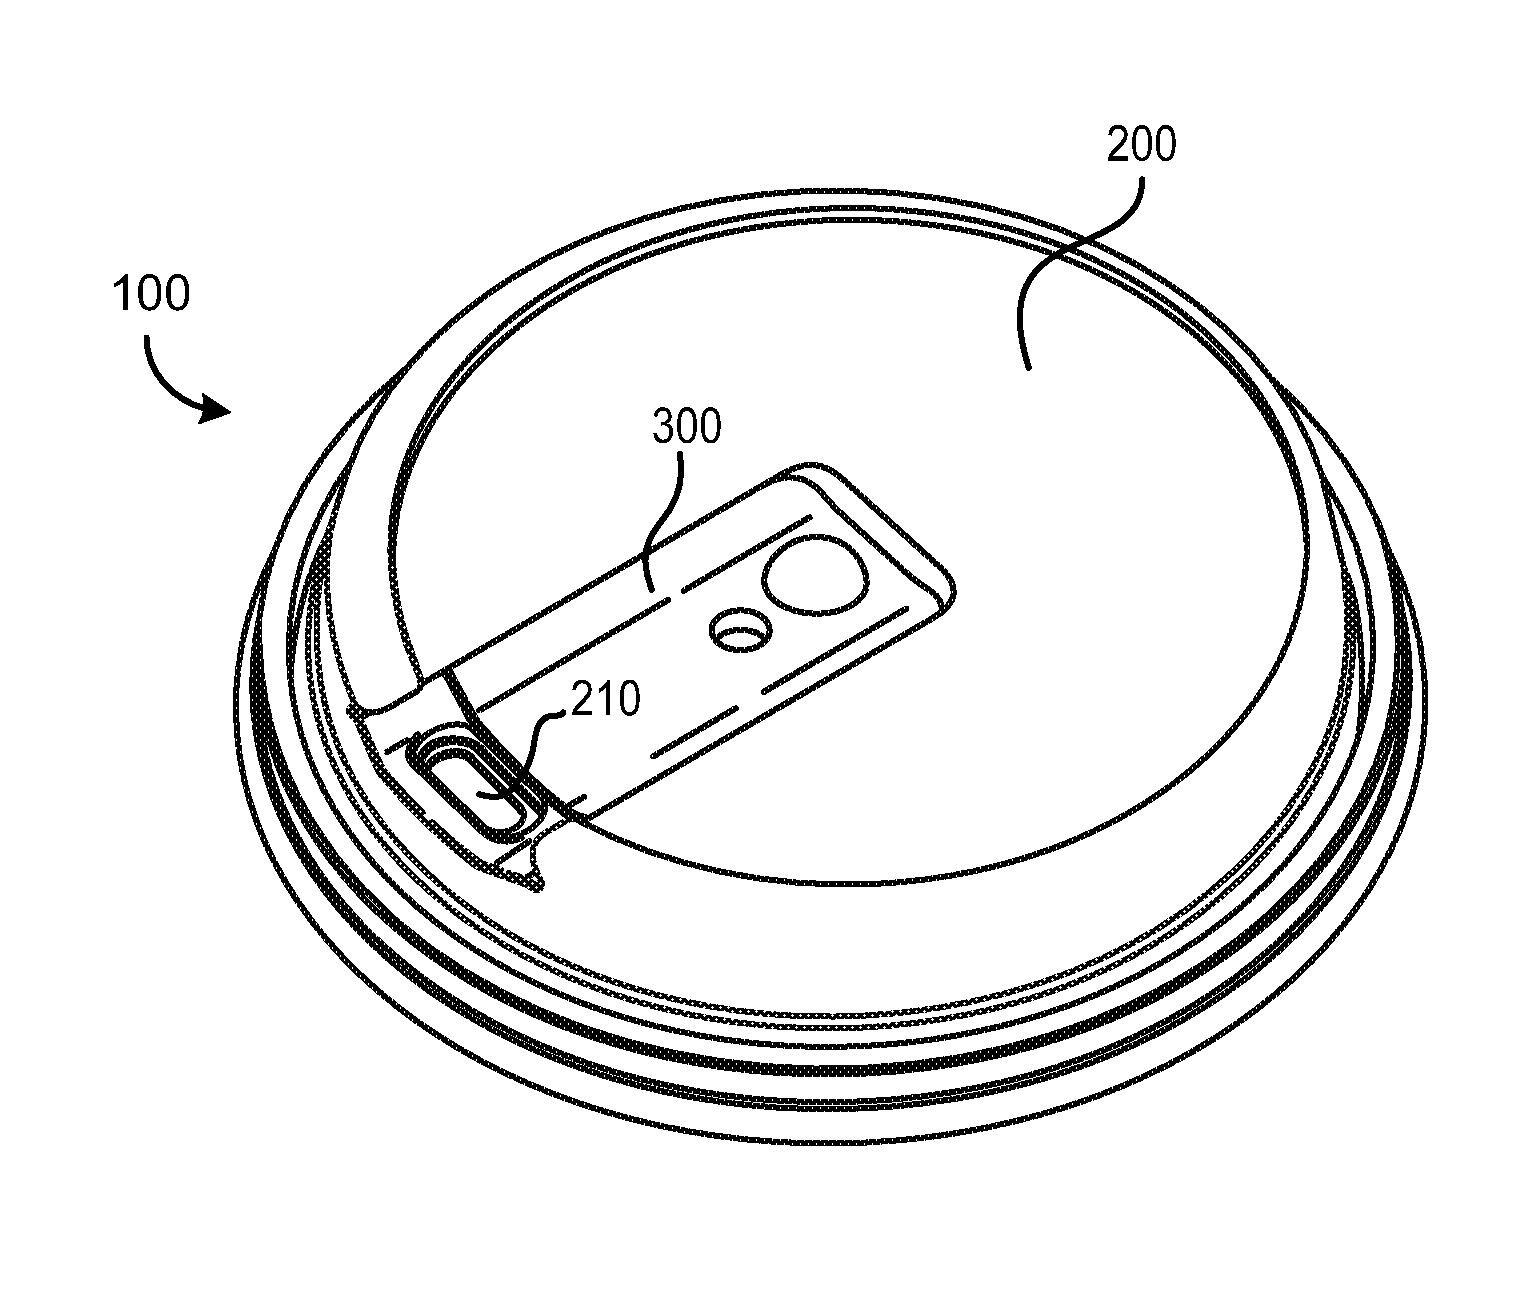 Drinking cup lid with self-securing sliding member